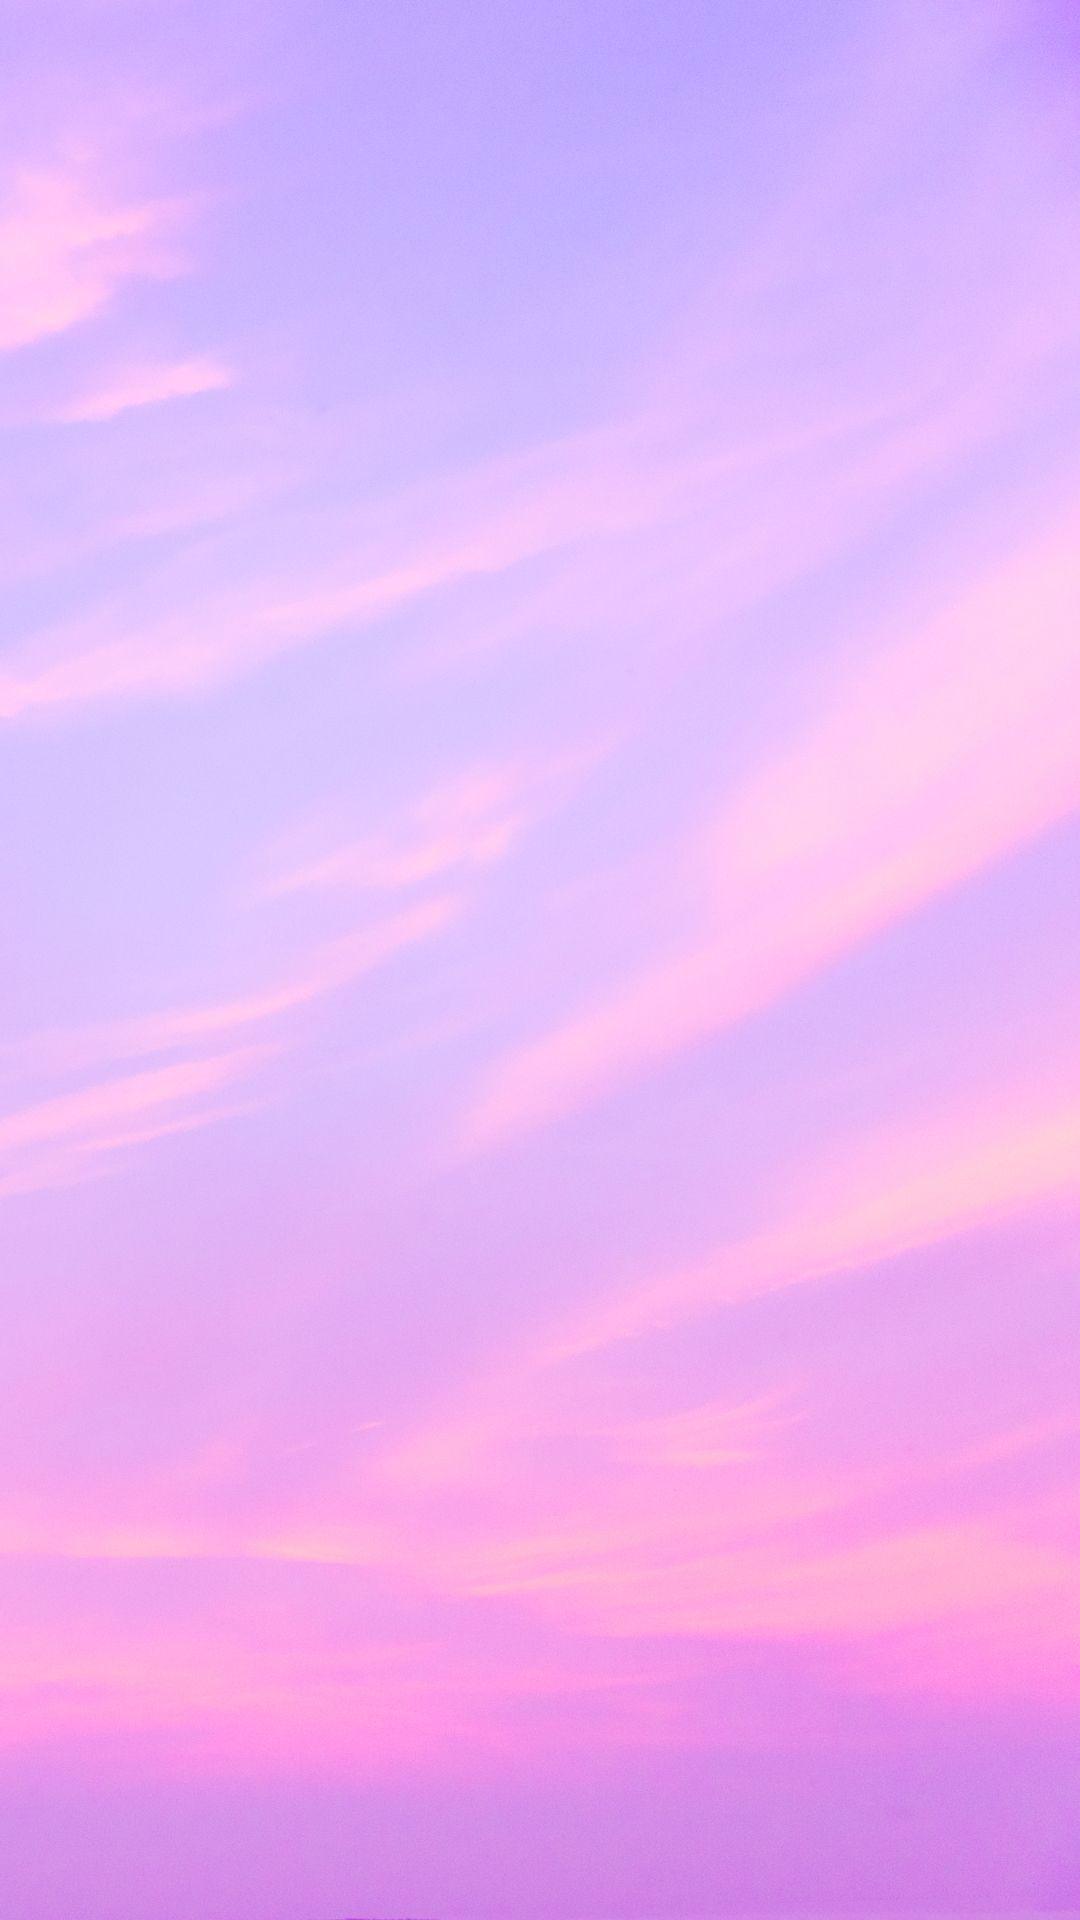 Pastel Aesthetic Clouds Wallpaper at